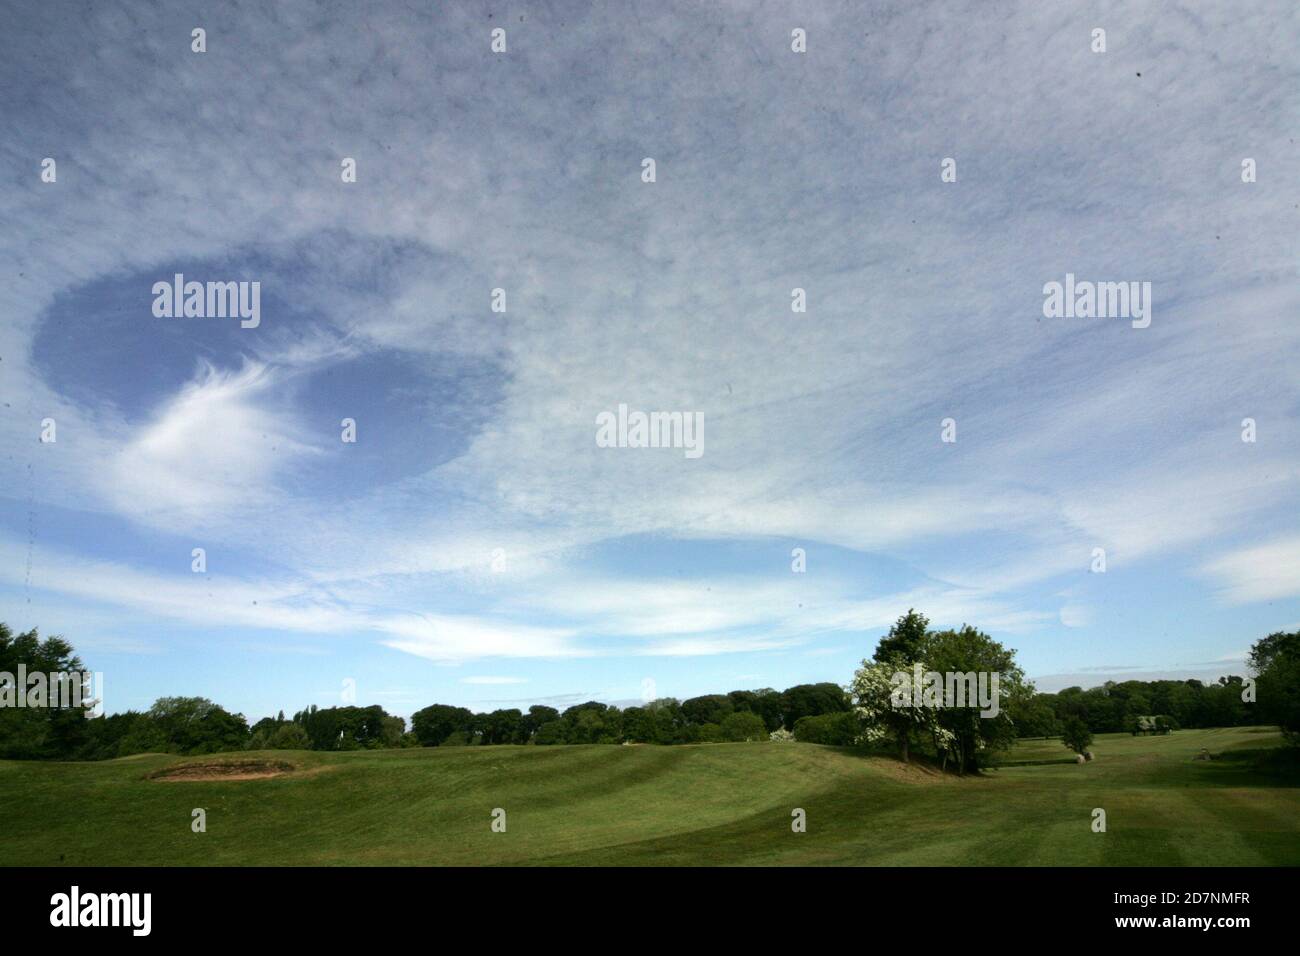 Ayr, South Ayrshire, Scotland, UK. A strange cloud formation over the golf course which makes it look like a hold has been punched in the cloud, known as Fallstreak or hole punch clouds. The clouds can form when water droplets are colder than freezing temperature but have yet to freeze. Stock Photo